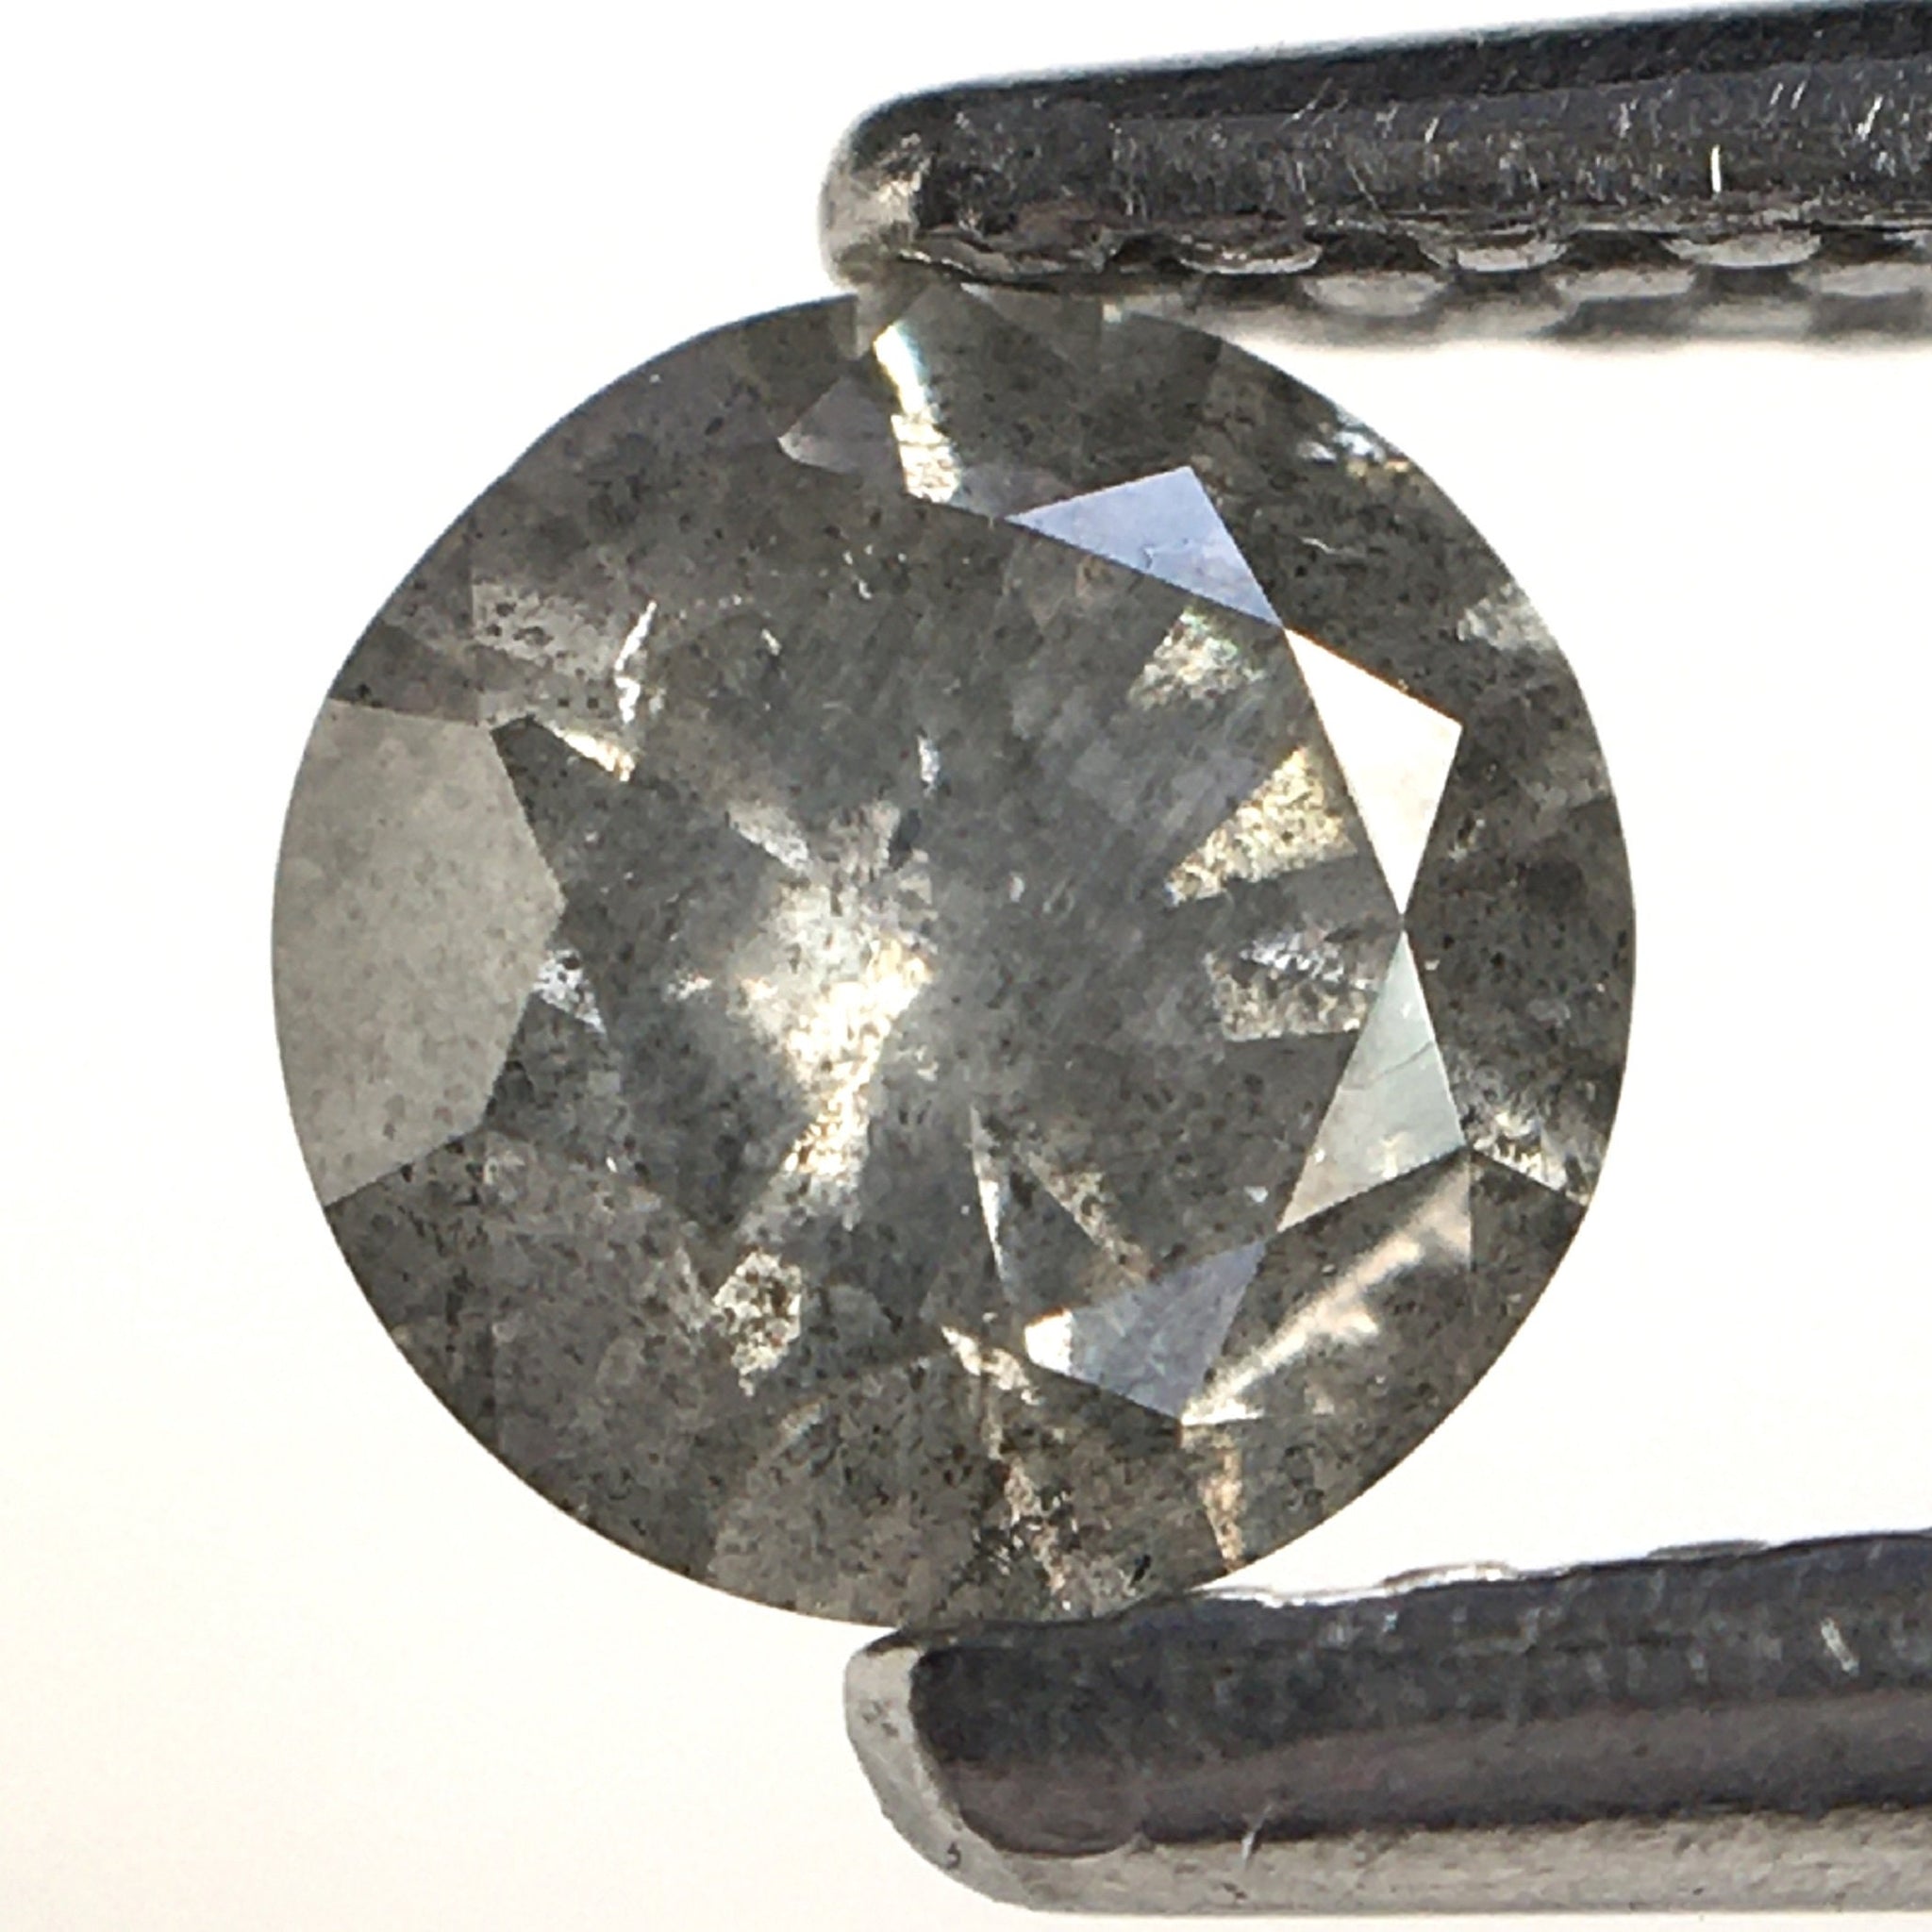 0.30 Ct Salt and pepper natural loose diamond 4.40 mm x 2.70 mm, Round brilliant cut diamond best for engagement rings and jewellery SJ22/12